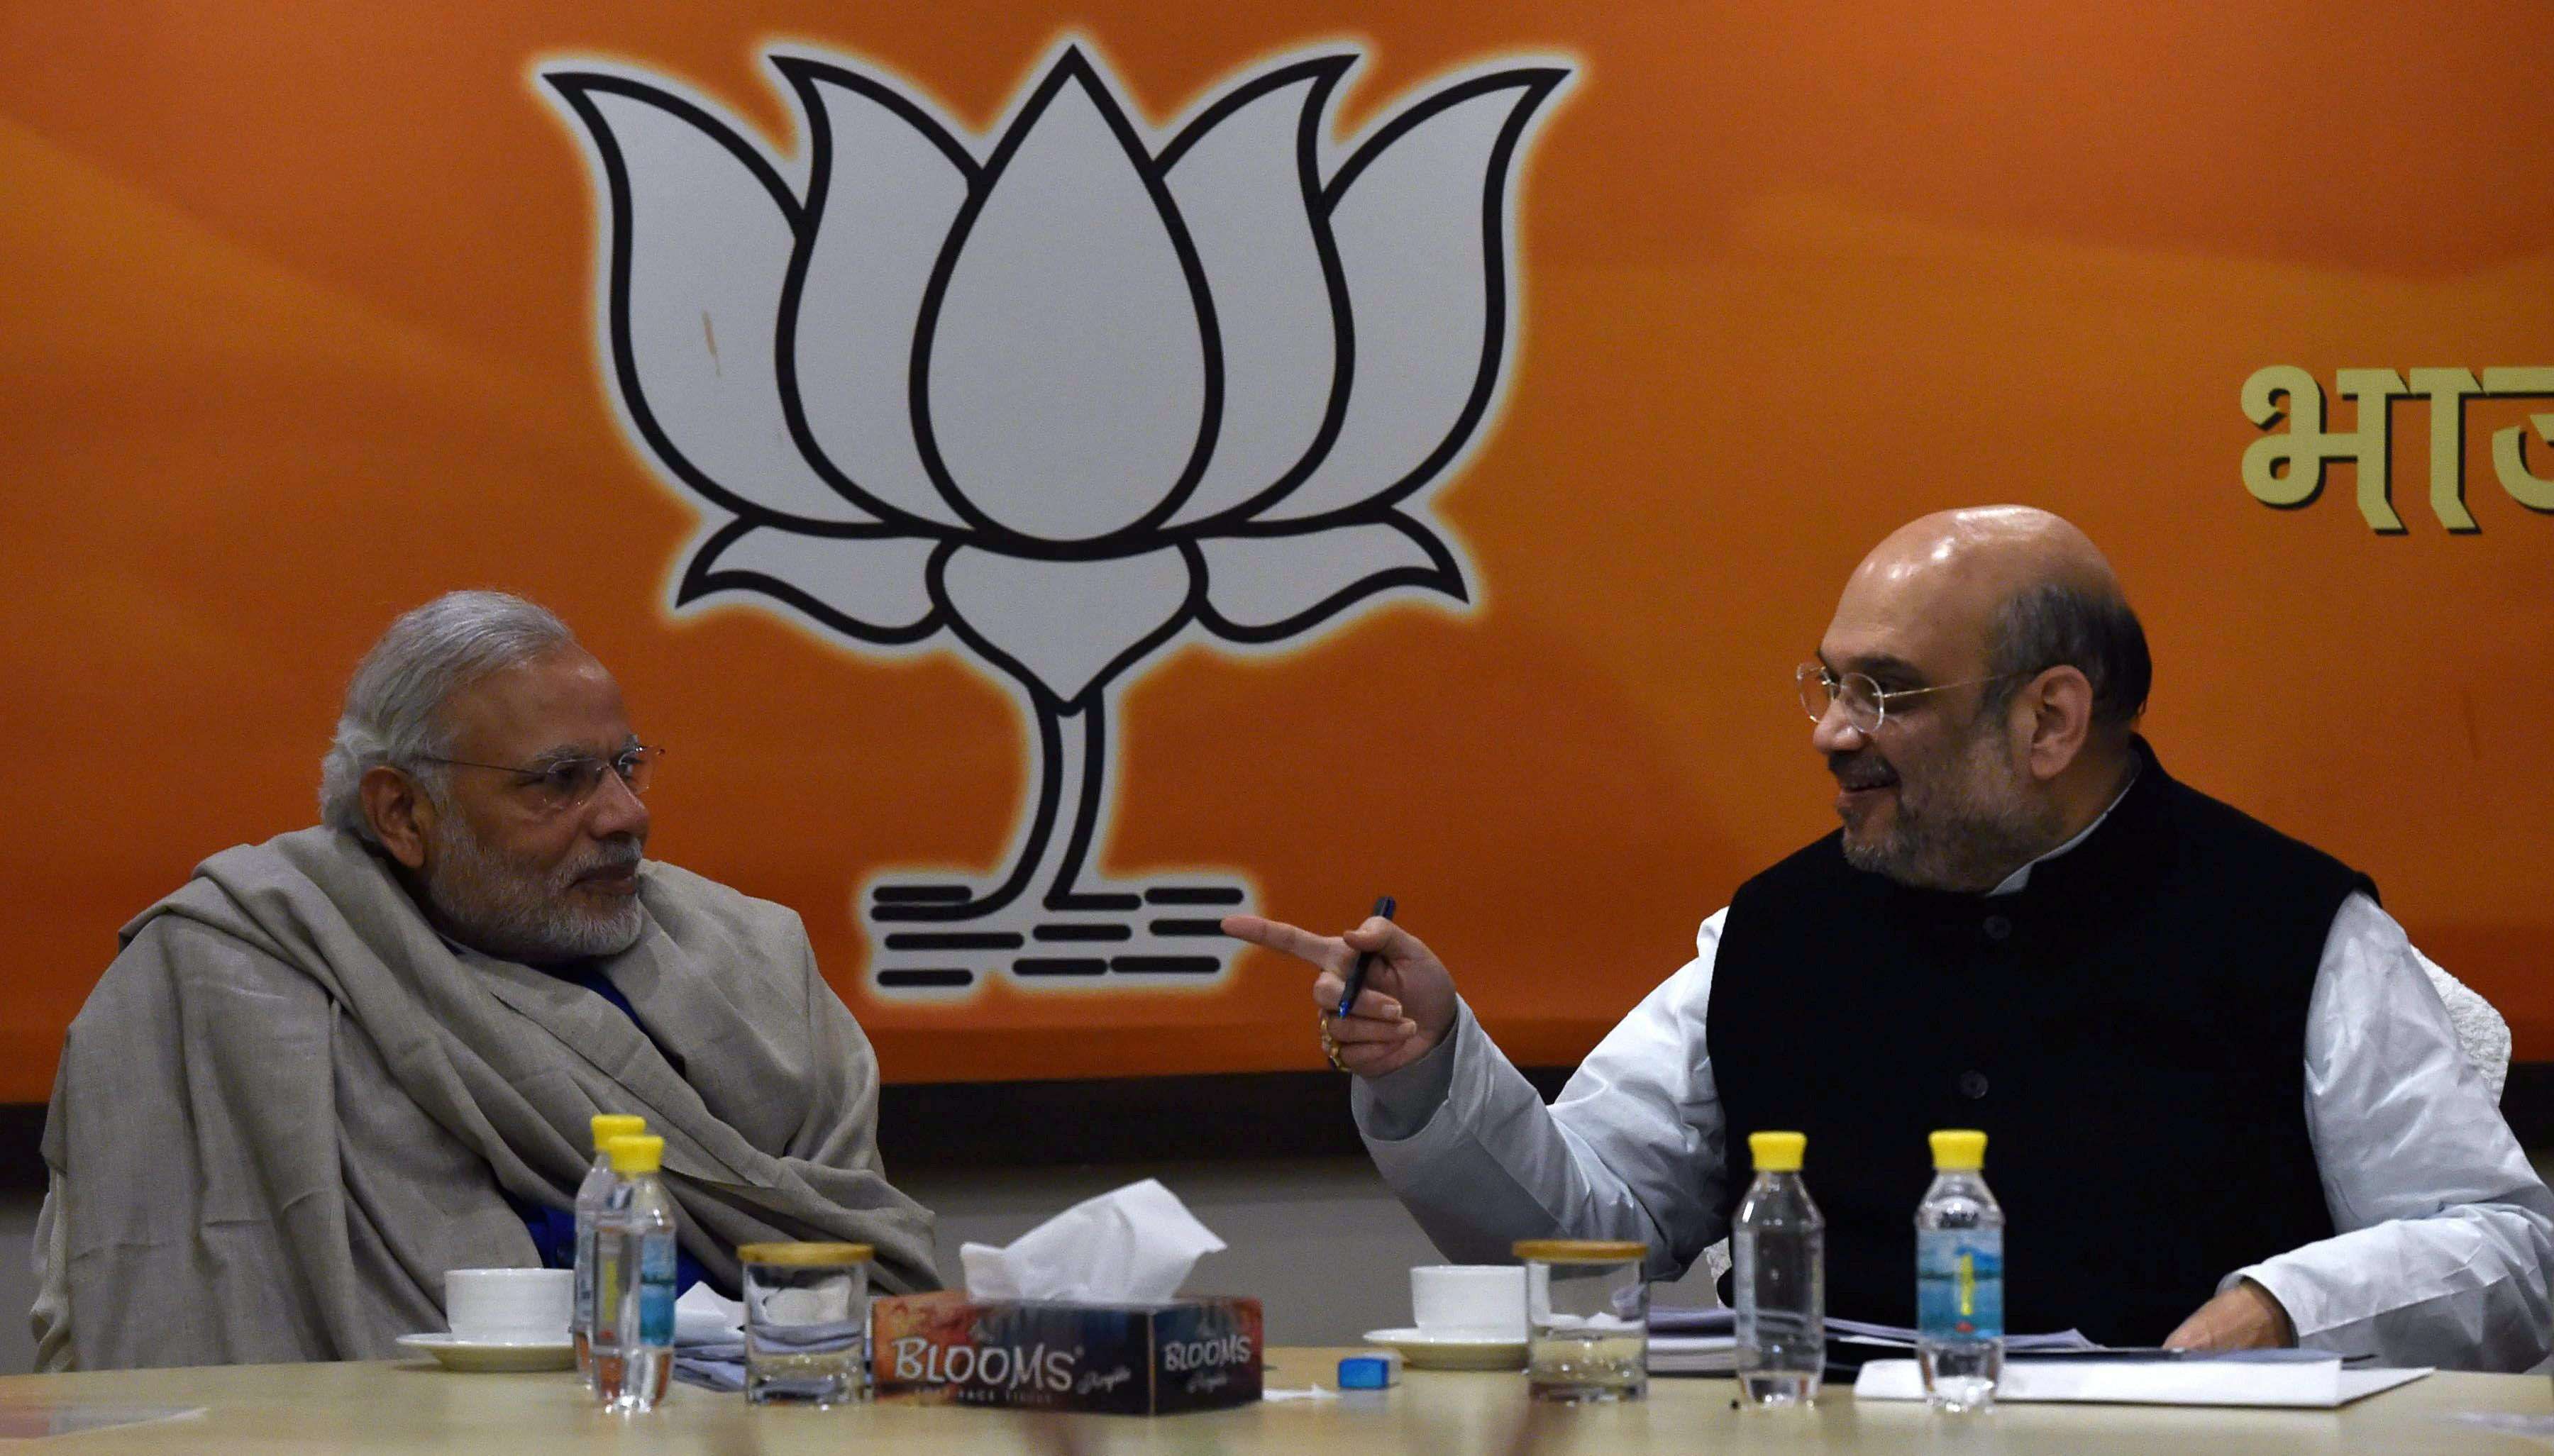 New Delhi: Prime Minister Narendra Modi and BJP President Amit Shah during the Central Election Committee (CEC) meeting for Uttar Pradesh state elections at BJP headquarters in New Delhi on Sunday. PTI Photo by Vijay Verma (PTI1_15_2017_000234B)